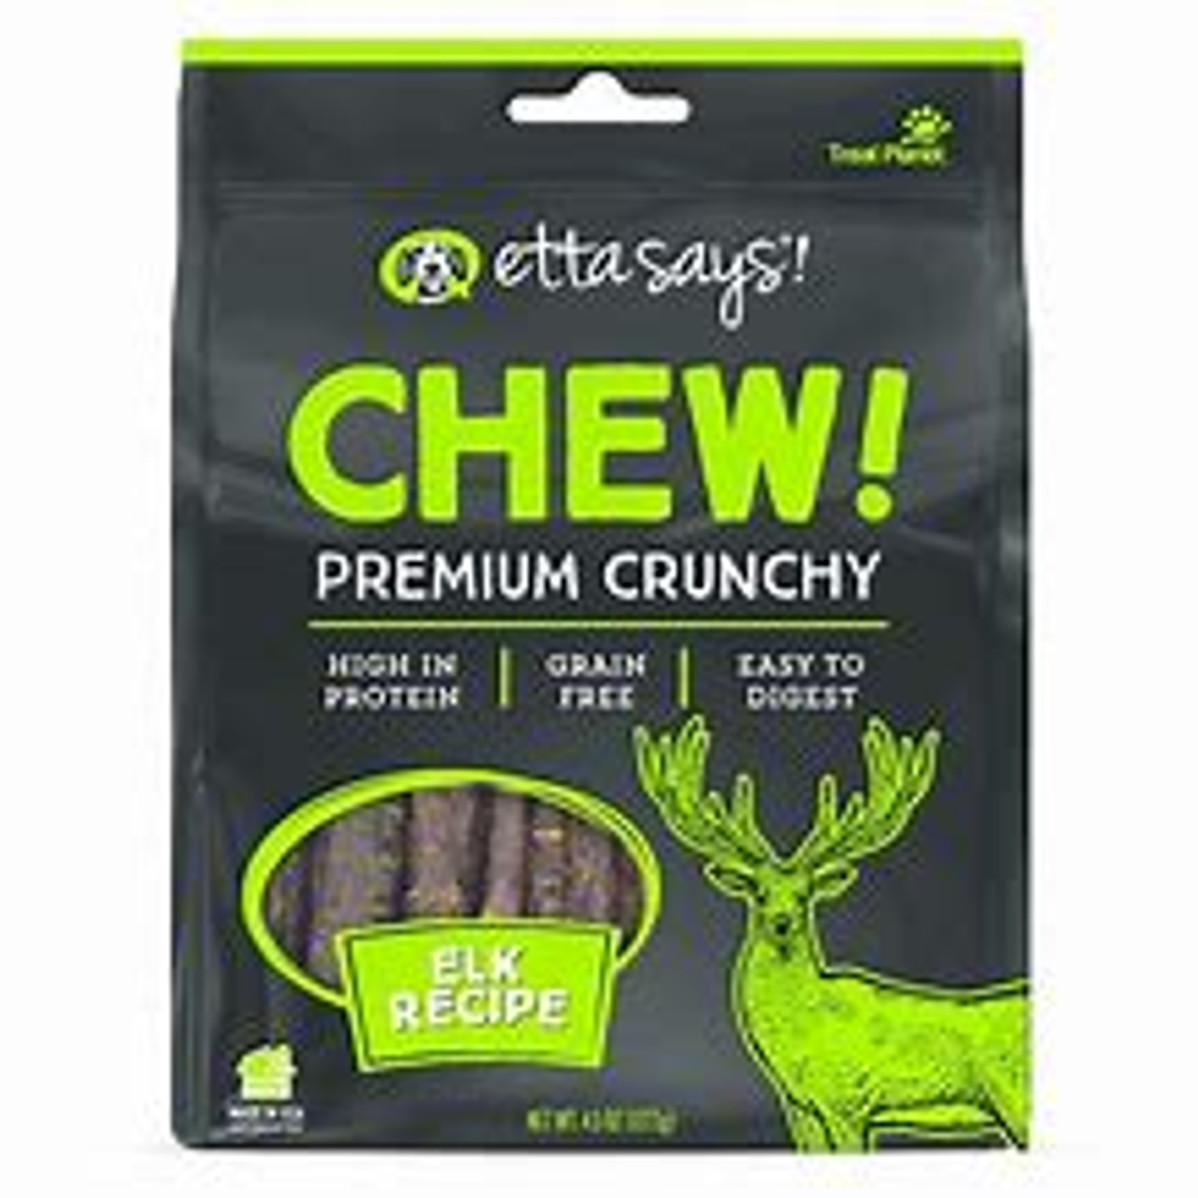 Details

These crunchy chews are a longer-lasting, high-protein treat for your pup.
Made with a unique blend of rawhide and elk meat, specially formulated for easy digestion.
Made in the USA with all-natural ingredients and proteins sourced from American farms.
A no-odor, stain-free, carpet-friendly formula.
Grain-free, and crafted without the use of additives or preservatives.

Give your dog a treat he’ll “chews” over and over again with Etta Says! Chew! Premium Crunchy Elk Chew Dog Treats. These deliciously crunchable treats are high in protein, made with a unique blend of rawhide and elk meat specially formulated for safe and easy digestion. Your pup can chew away happily on these no-odor chews without staining the carpet, and the grain-free, all-natural recipe contains no additives or preservatives. As a bonus, the high crunch factor can also be beneficial for your pal’s teeth. Chow down, buddy!